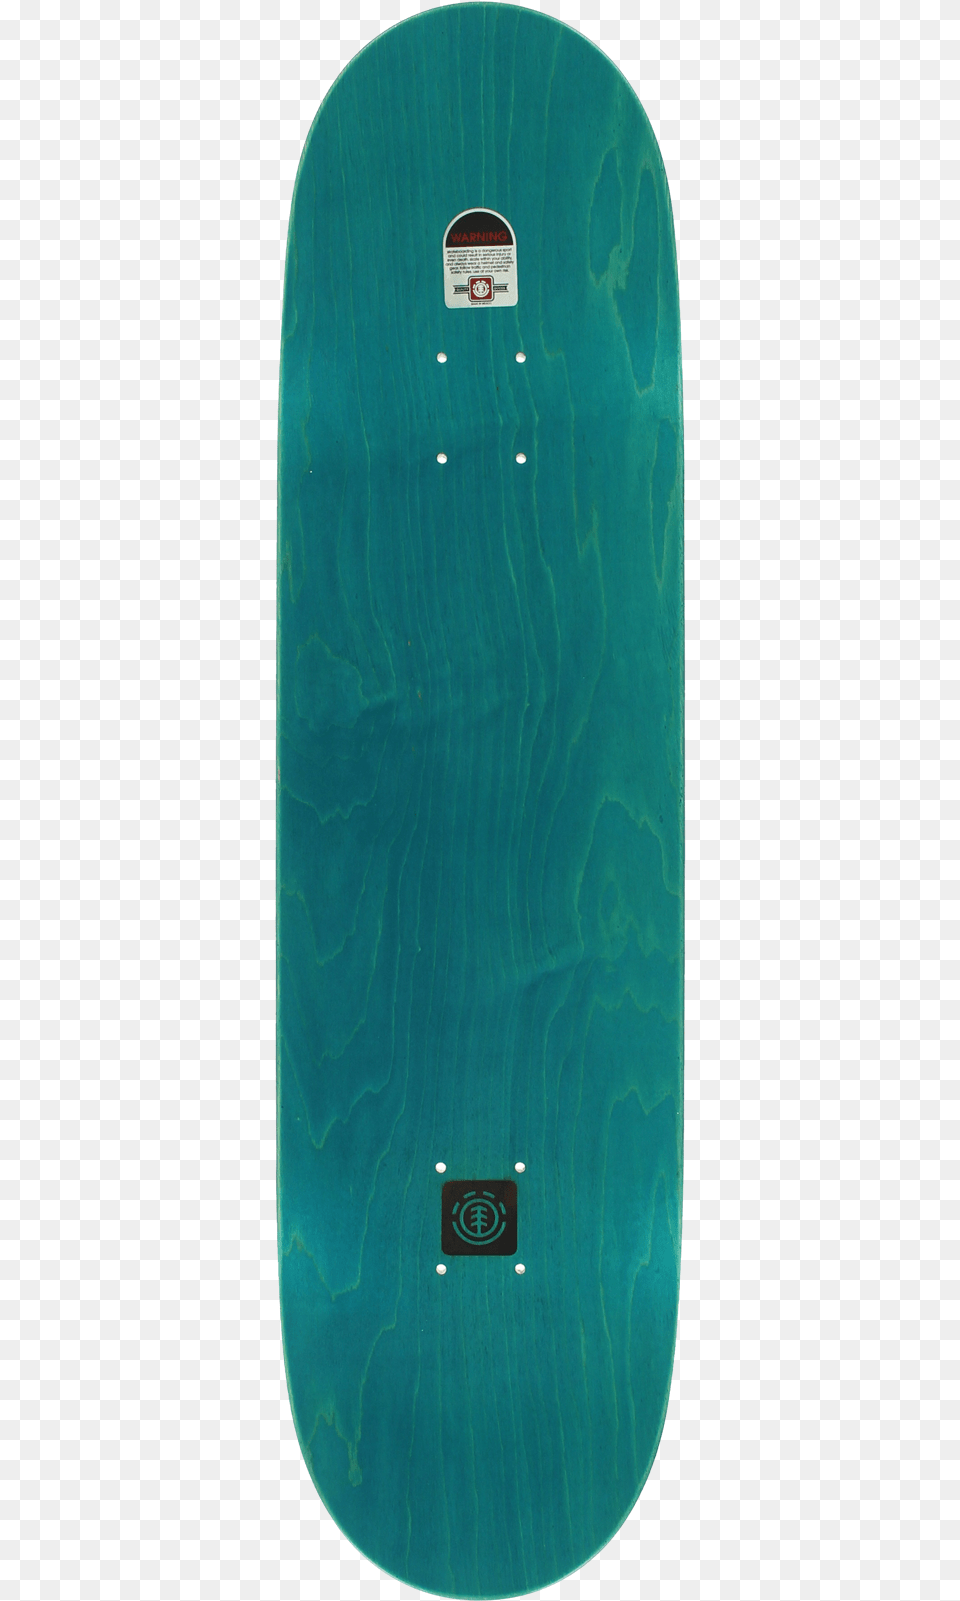 Element Nyjah Silhouette Skateboard Deck Skateboard Deck Silhouette, Nature, Outdoors, Sea, Sea Waves Free Png Download